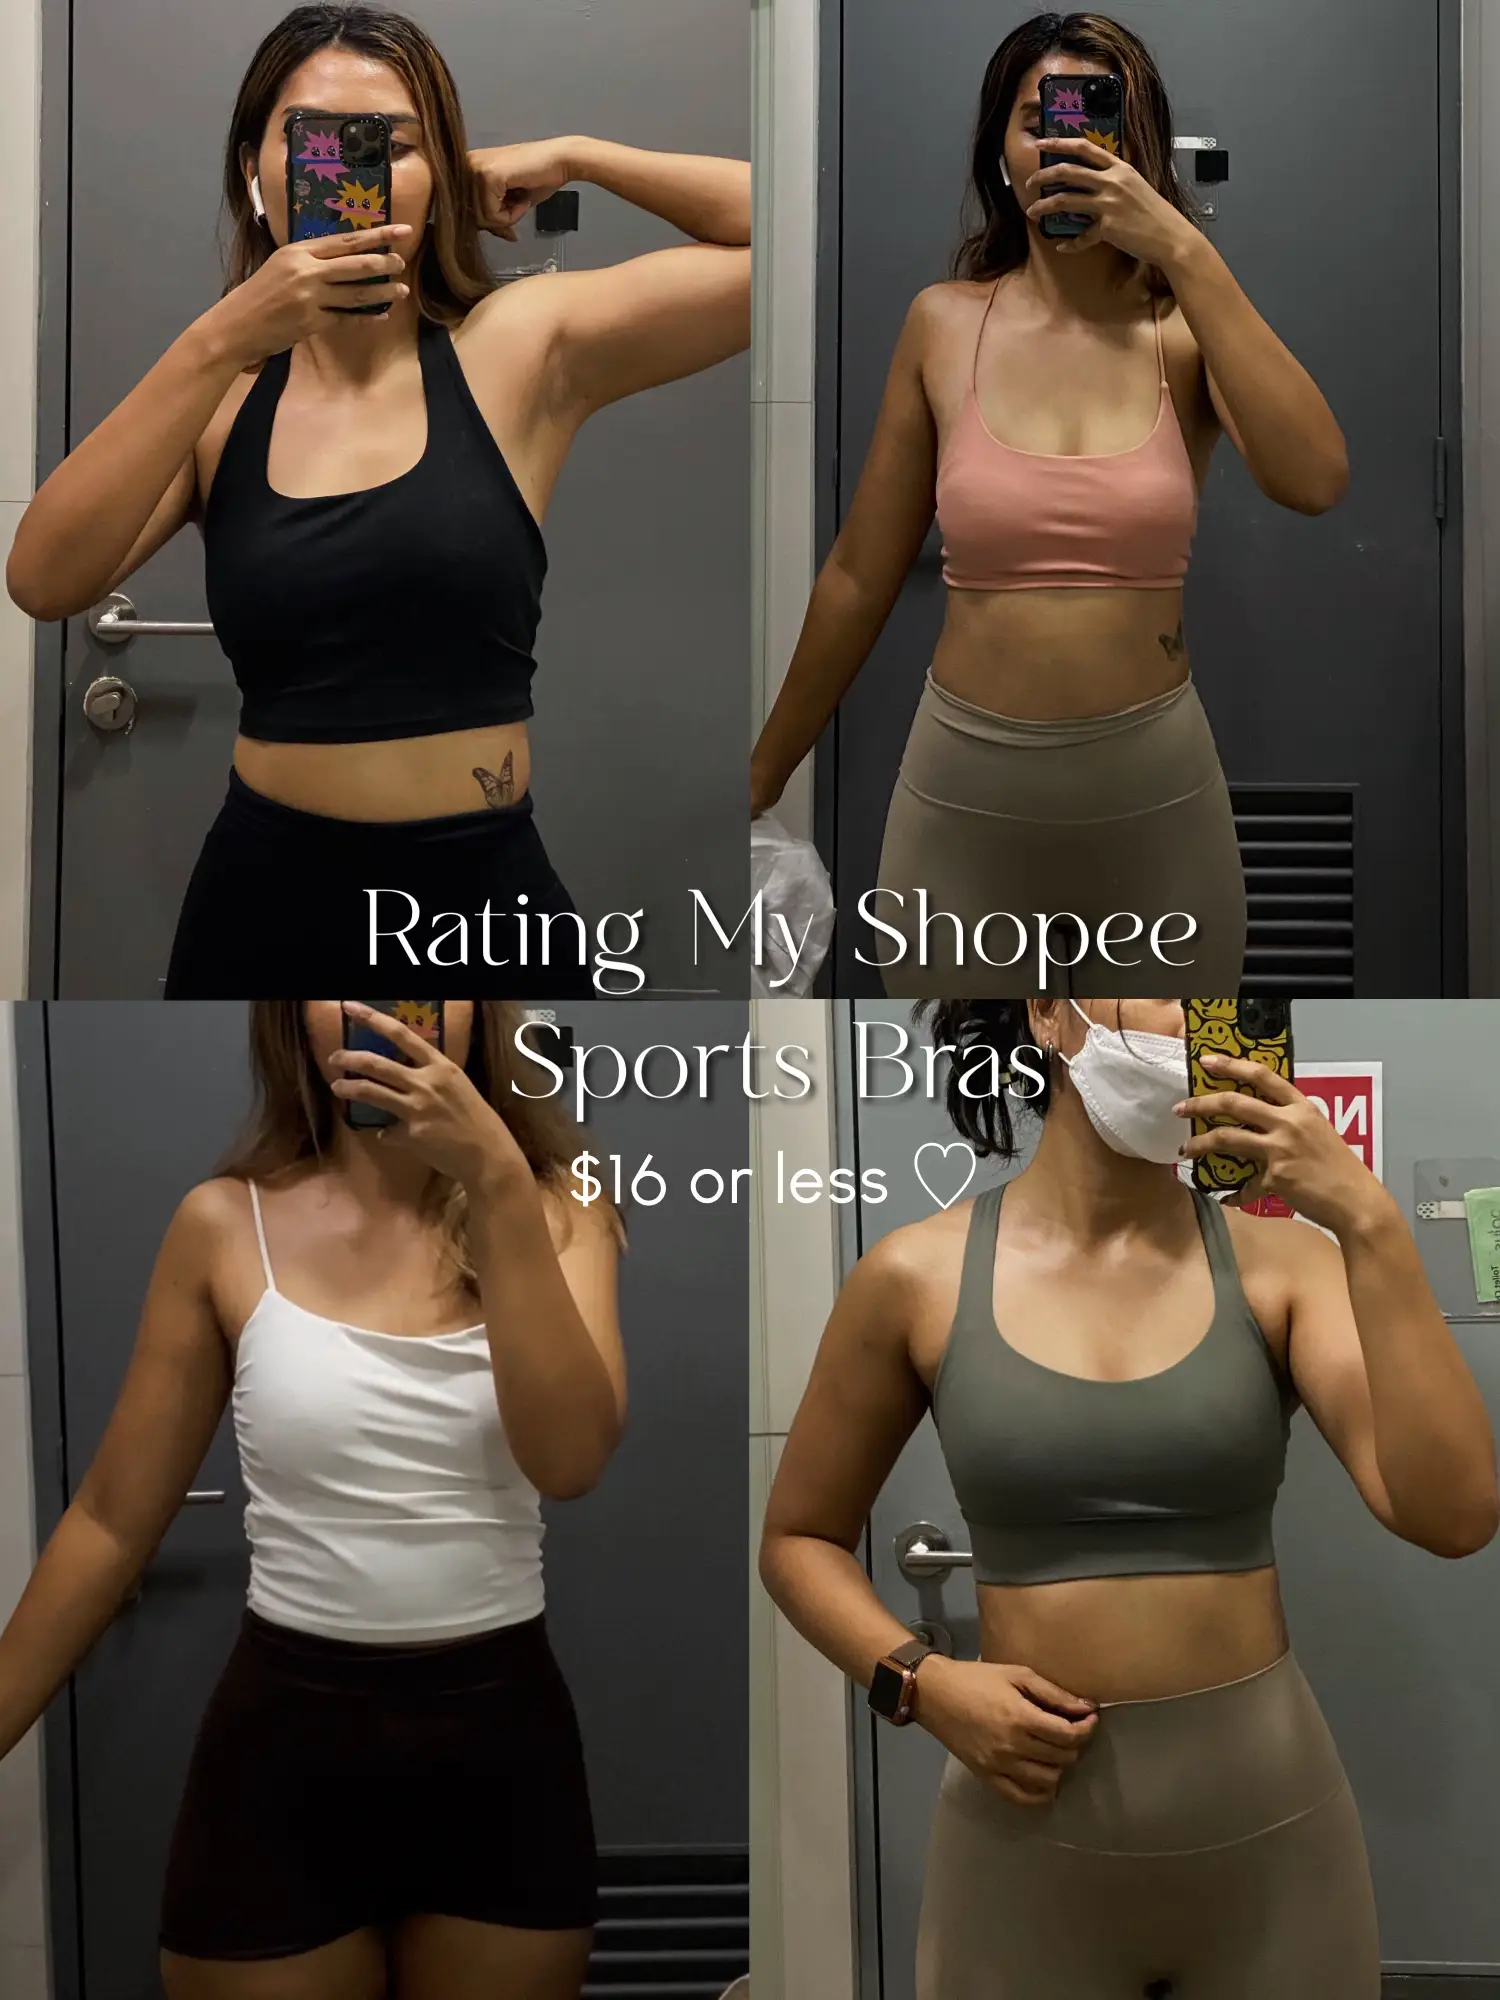 Cheers Wide Shoulder Strap Yoga Bra U-Shaped Back Wireless Sport Fitness  Lace Push Up Stretchy Bra for Jogging 